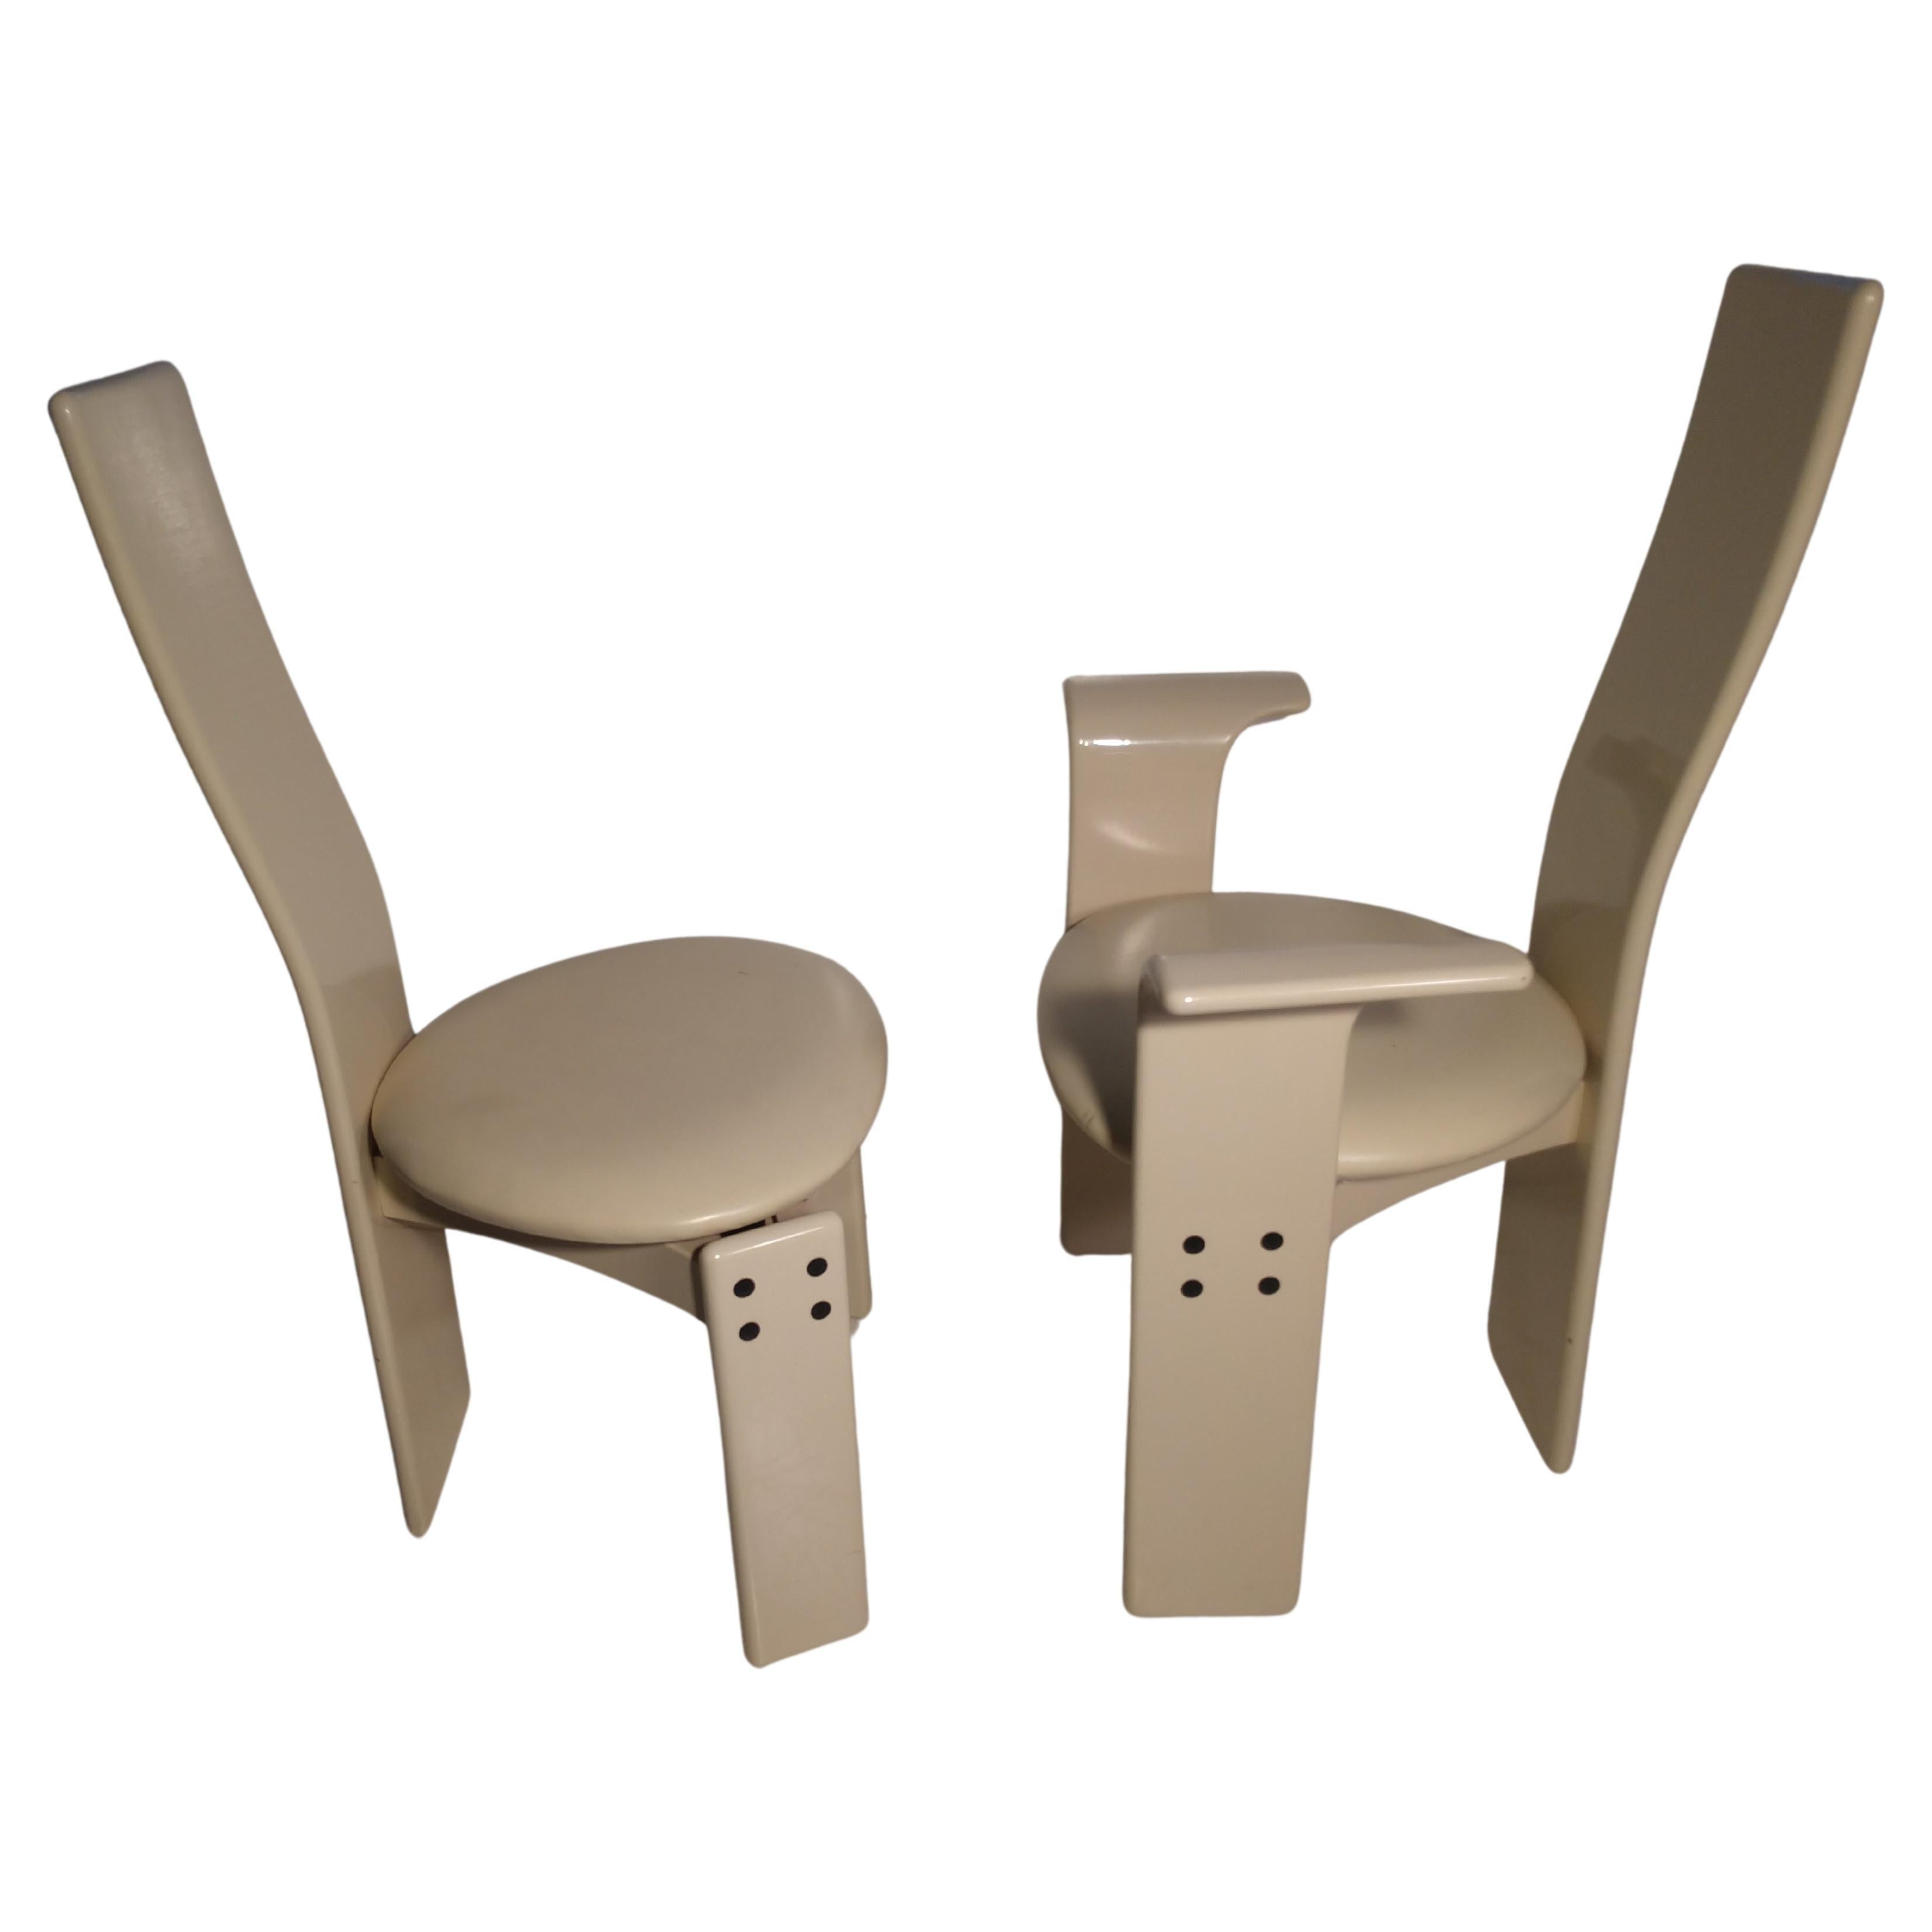 Set of 4 Postmodern lacquered white dining room chairs. Marked made in Italy, in the style of Saporiti. Minor blemishes to the lacquer is at a minimum.
Pictured. Size: Seat height is 18.